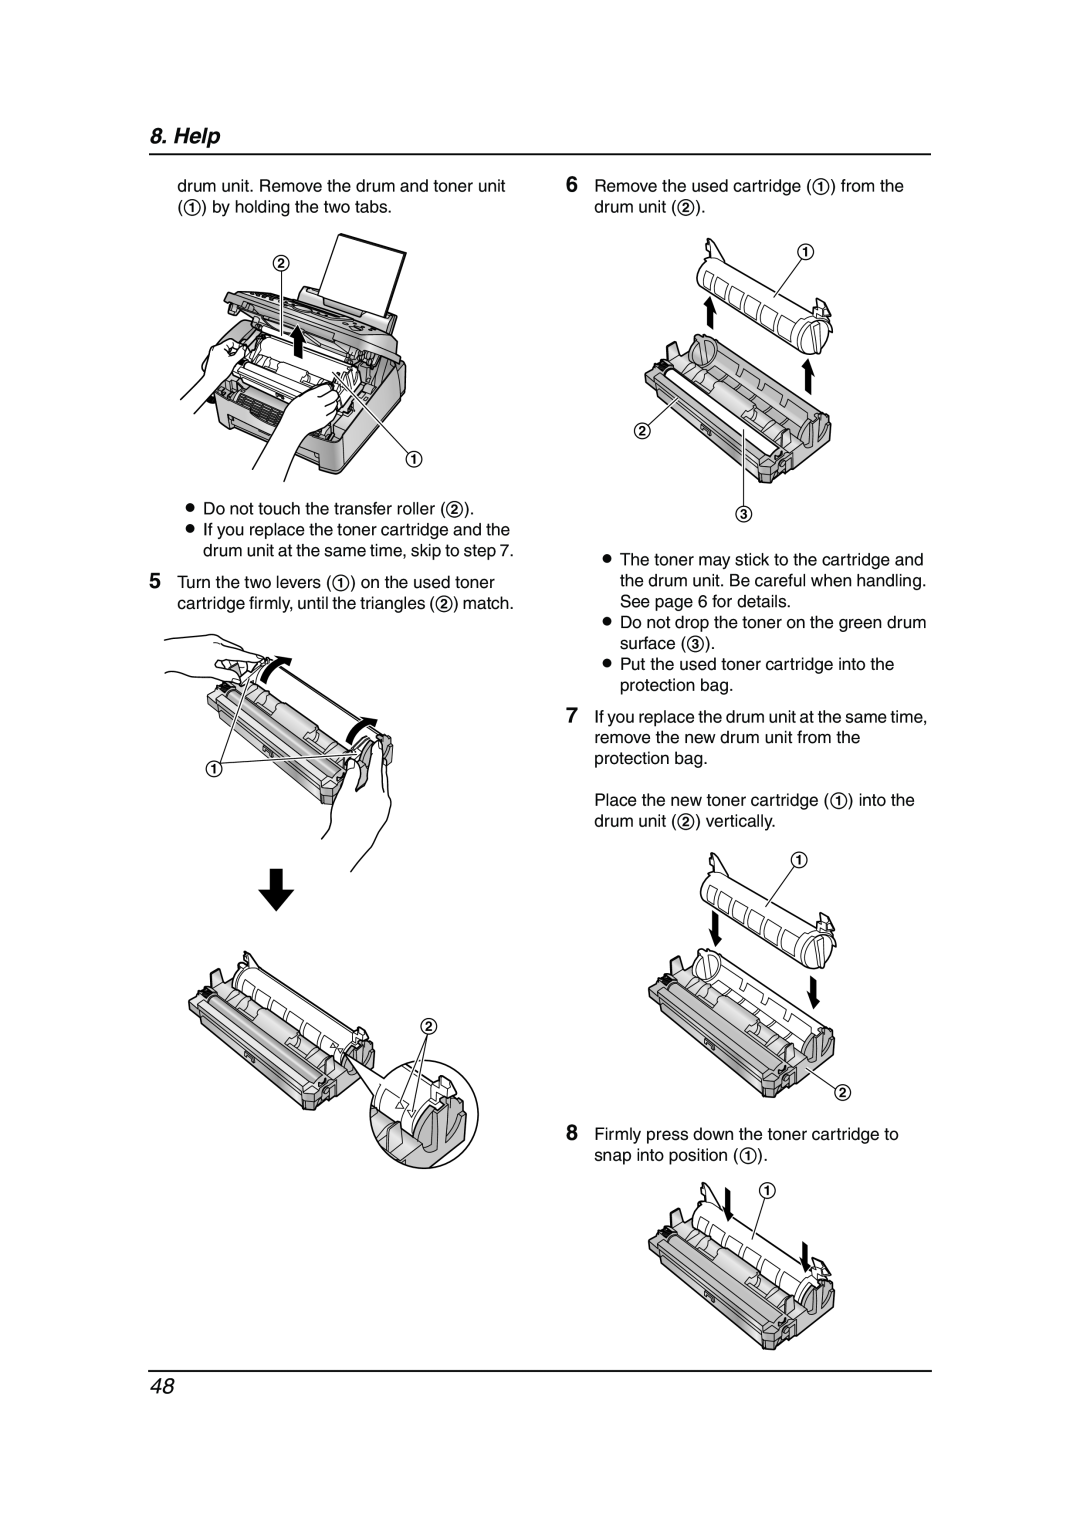 Panasonic KX-FL511AL manual Help, L If you replace the toner cartridge and the drum unit at the same time, skip to step 